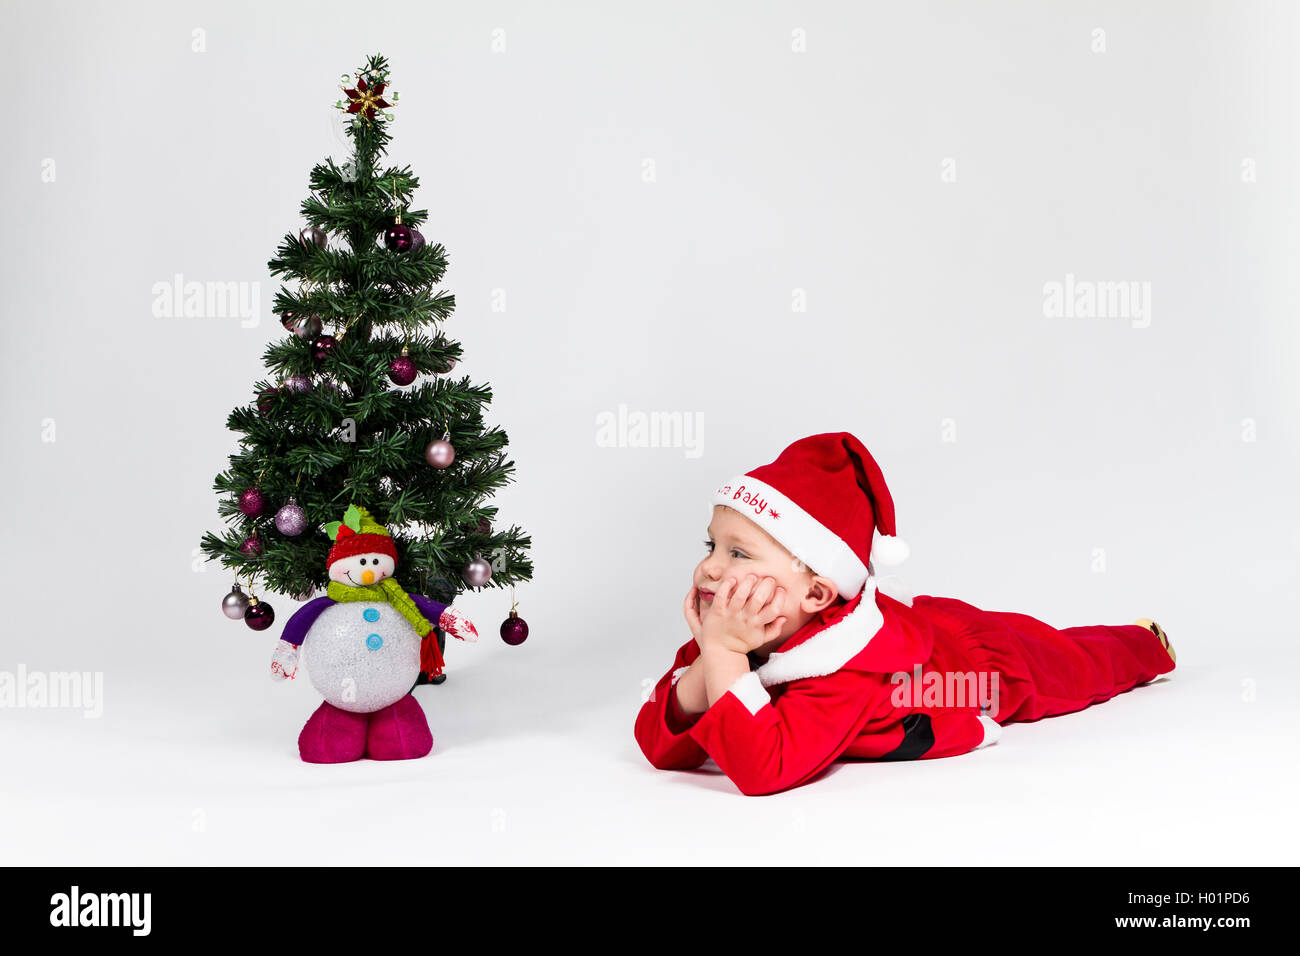 Dreaming baby boy dressed as Santa Claus lying next to Christmas tree. White background. Stock Photo